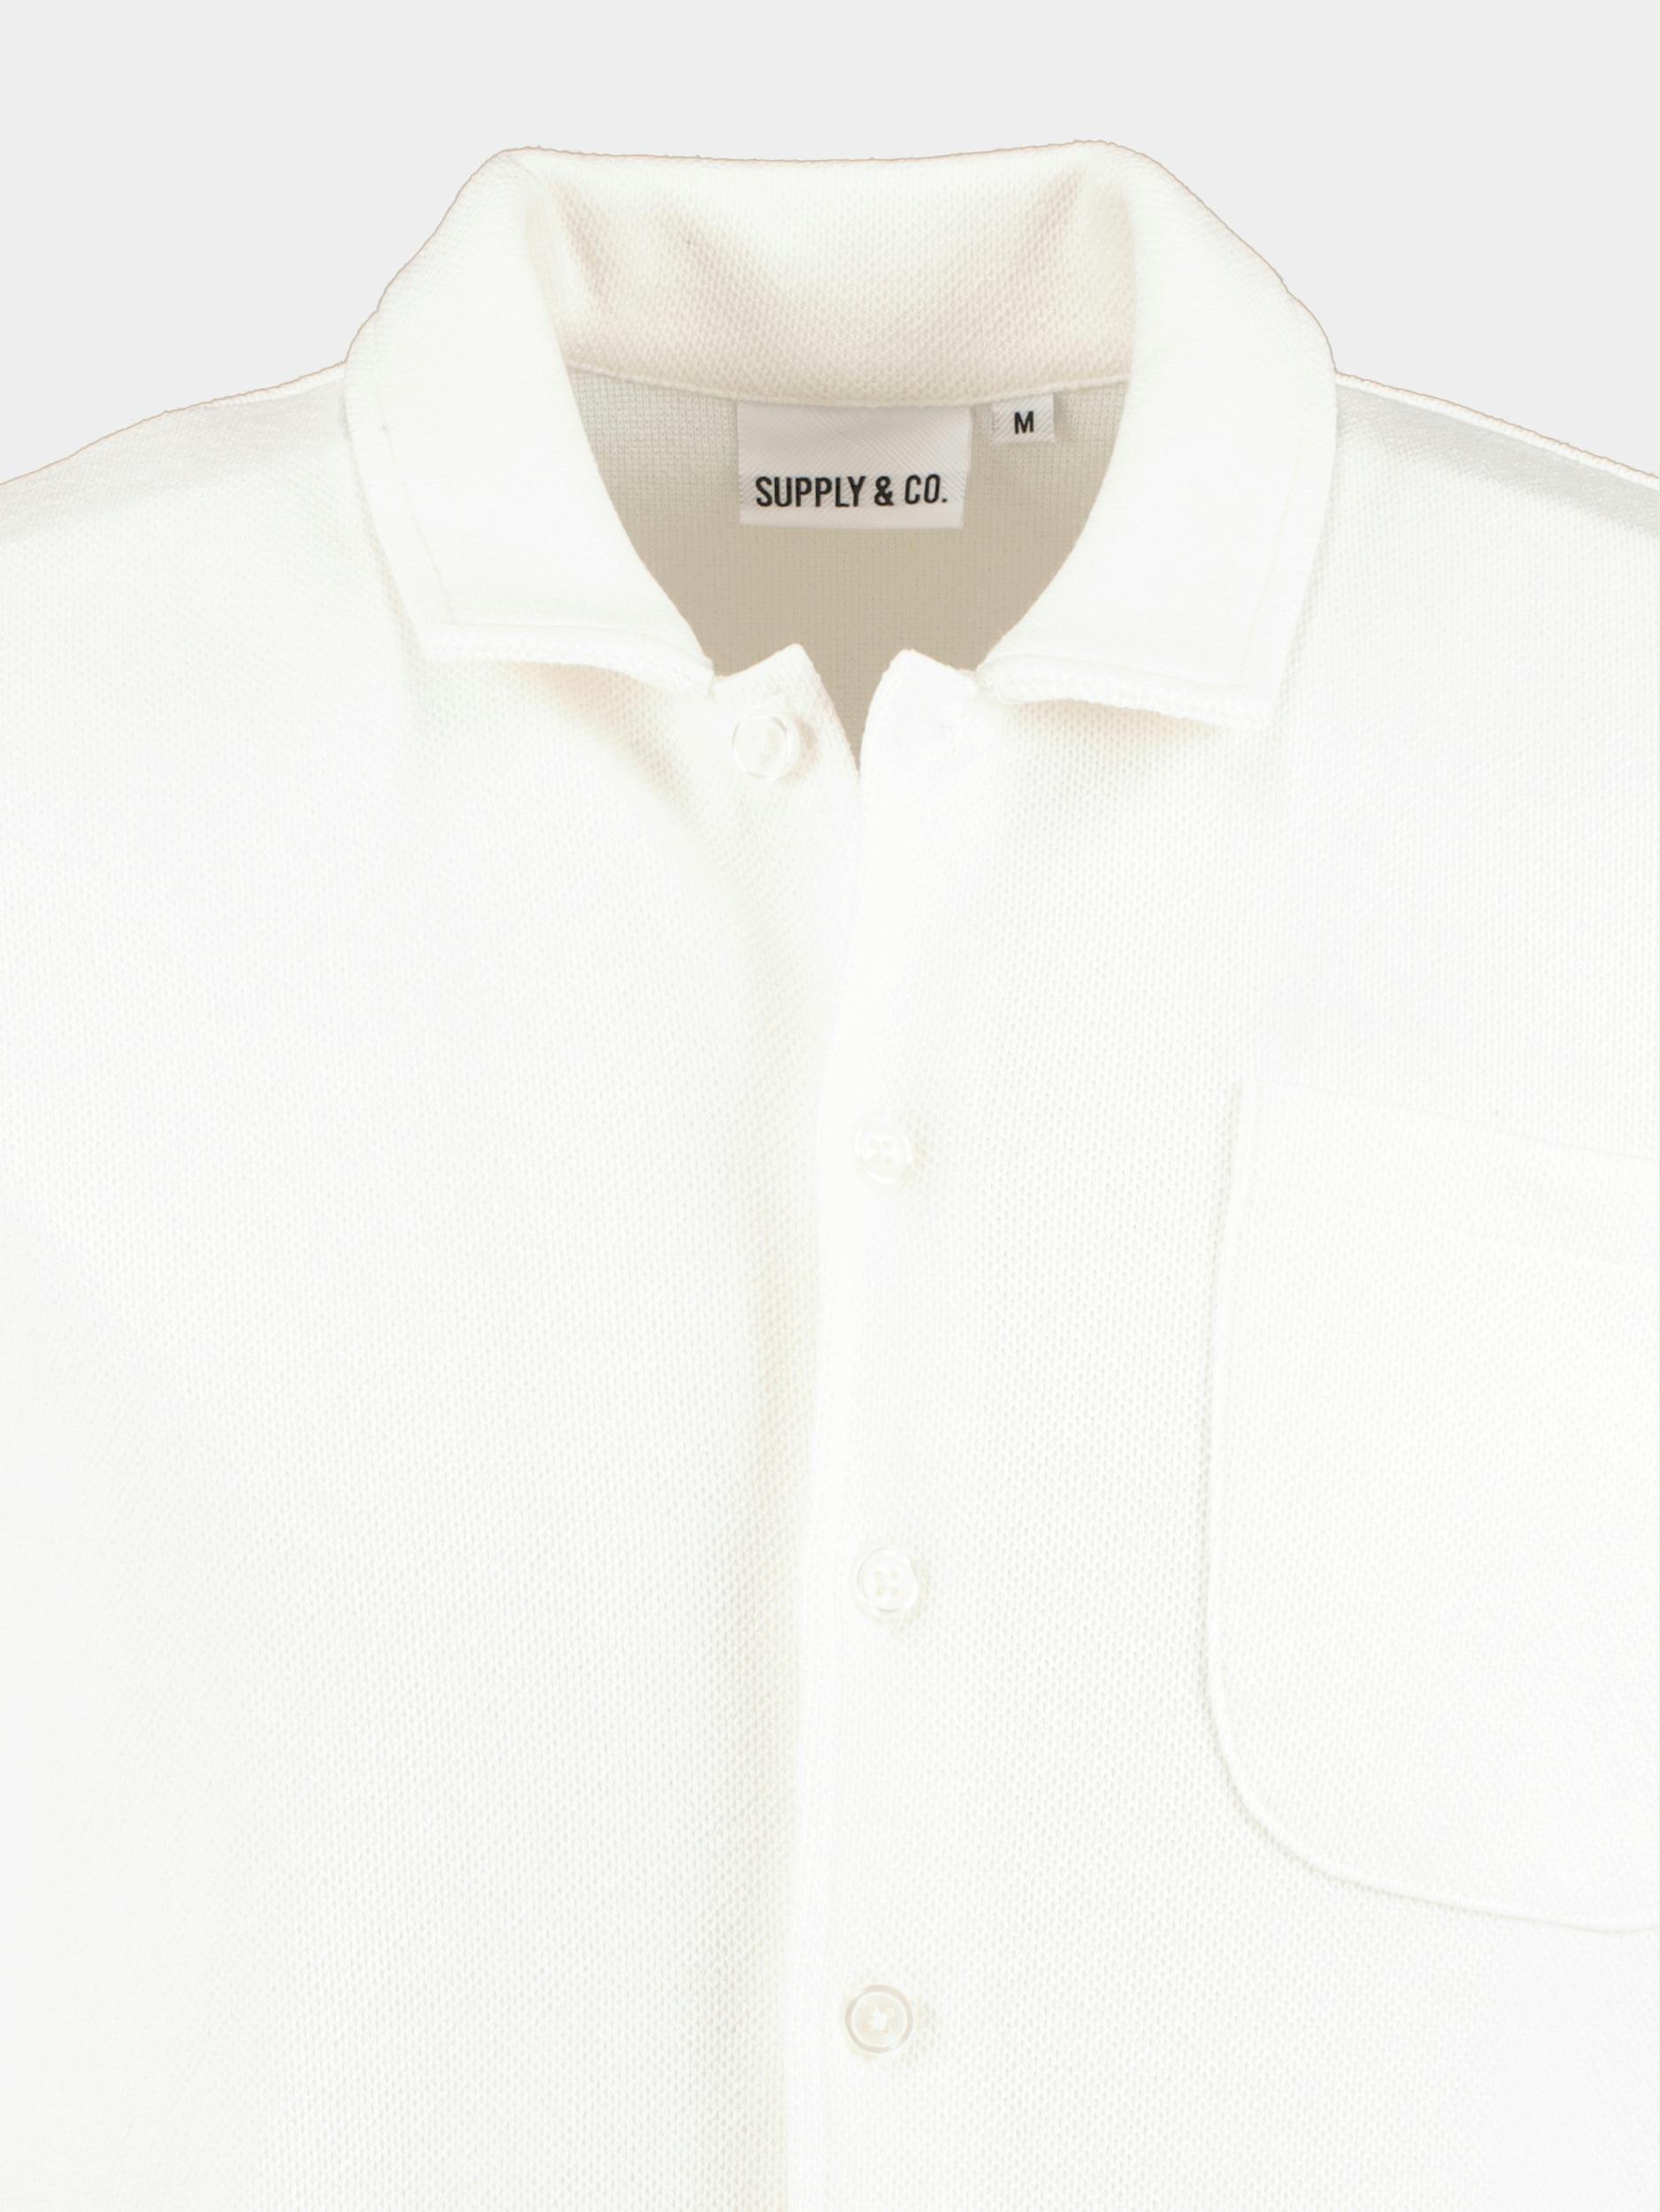 Supply & Co. Casual hemd lange mouw Beige Ame Full Buttoned Polo Shirt 23108AM01/150 off-white